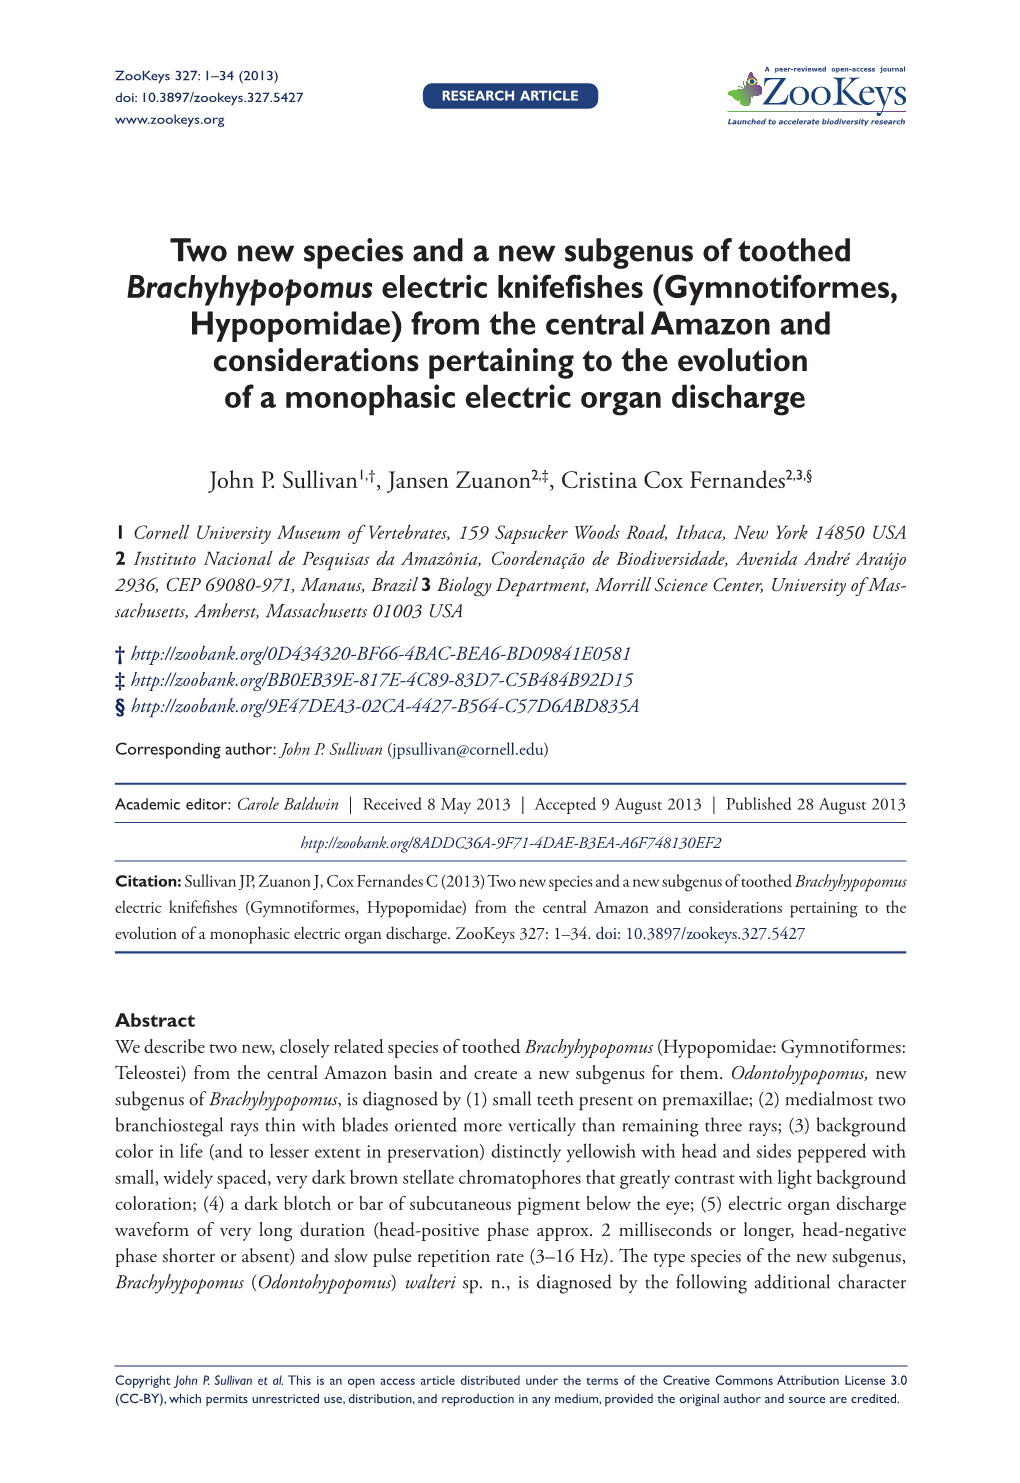 Gymnotiformes, Hypopomidae) from the Central Amazon and Considerations Pertaining to the Evolution of a Monophasic Electric Organ Discharge